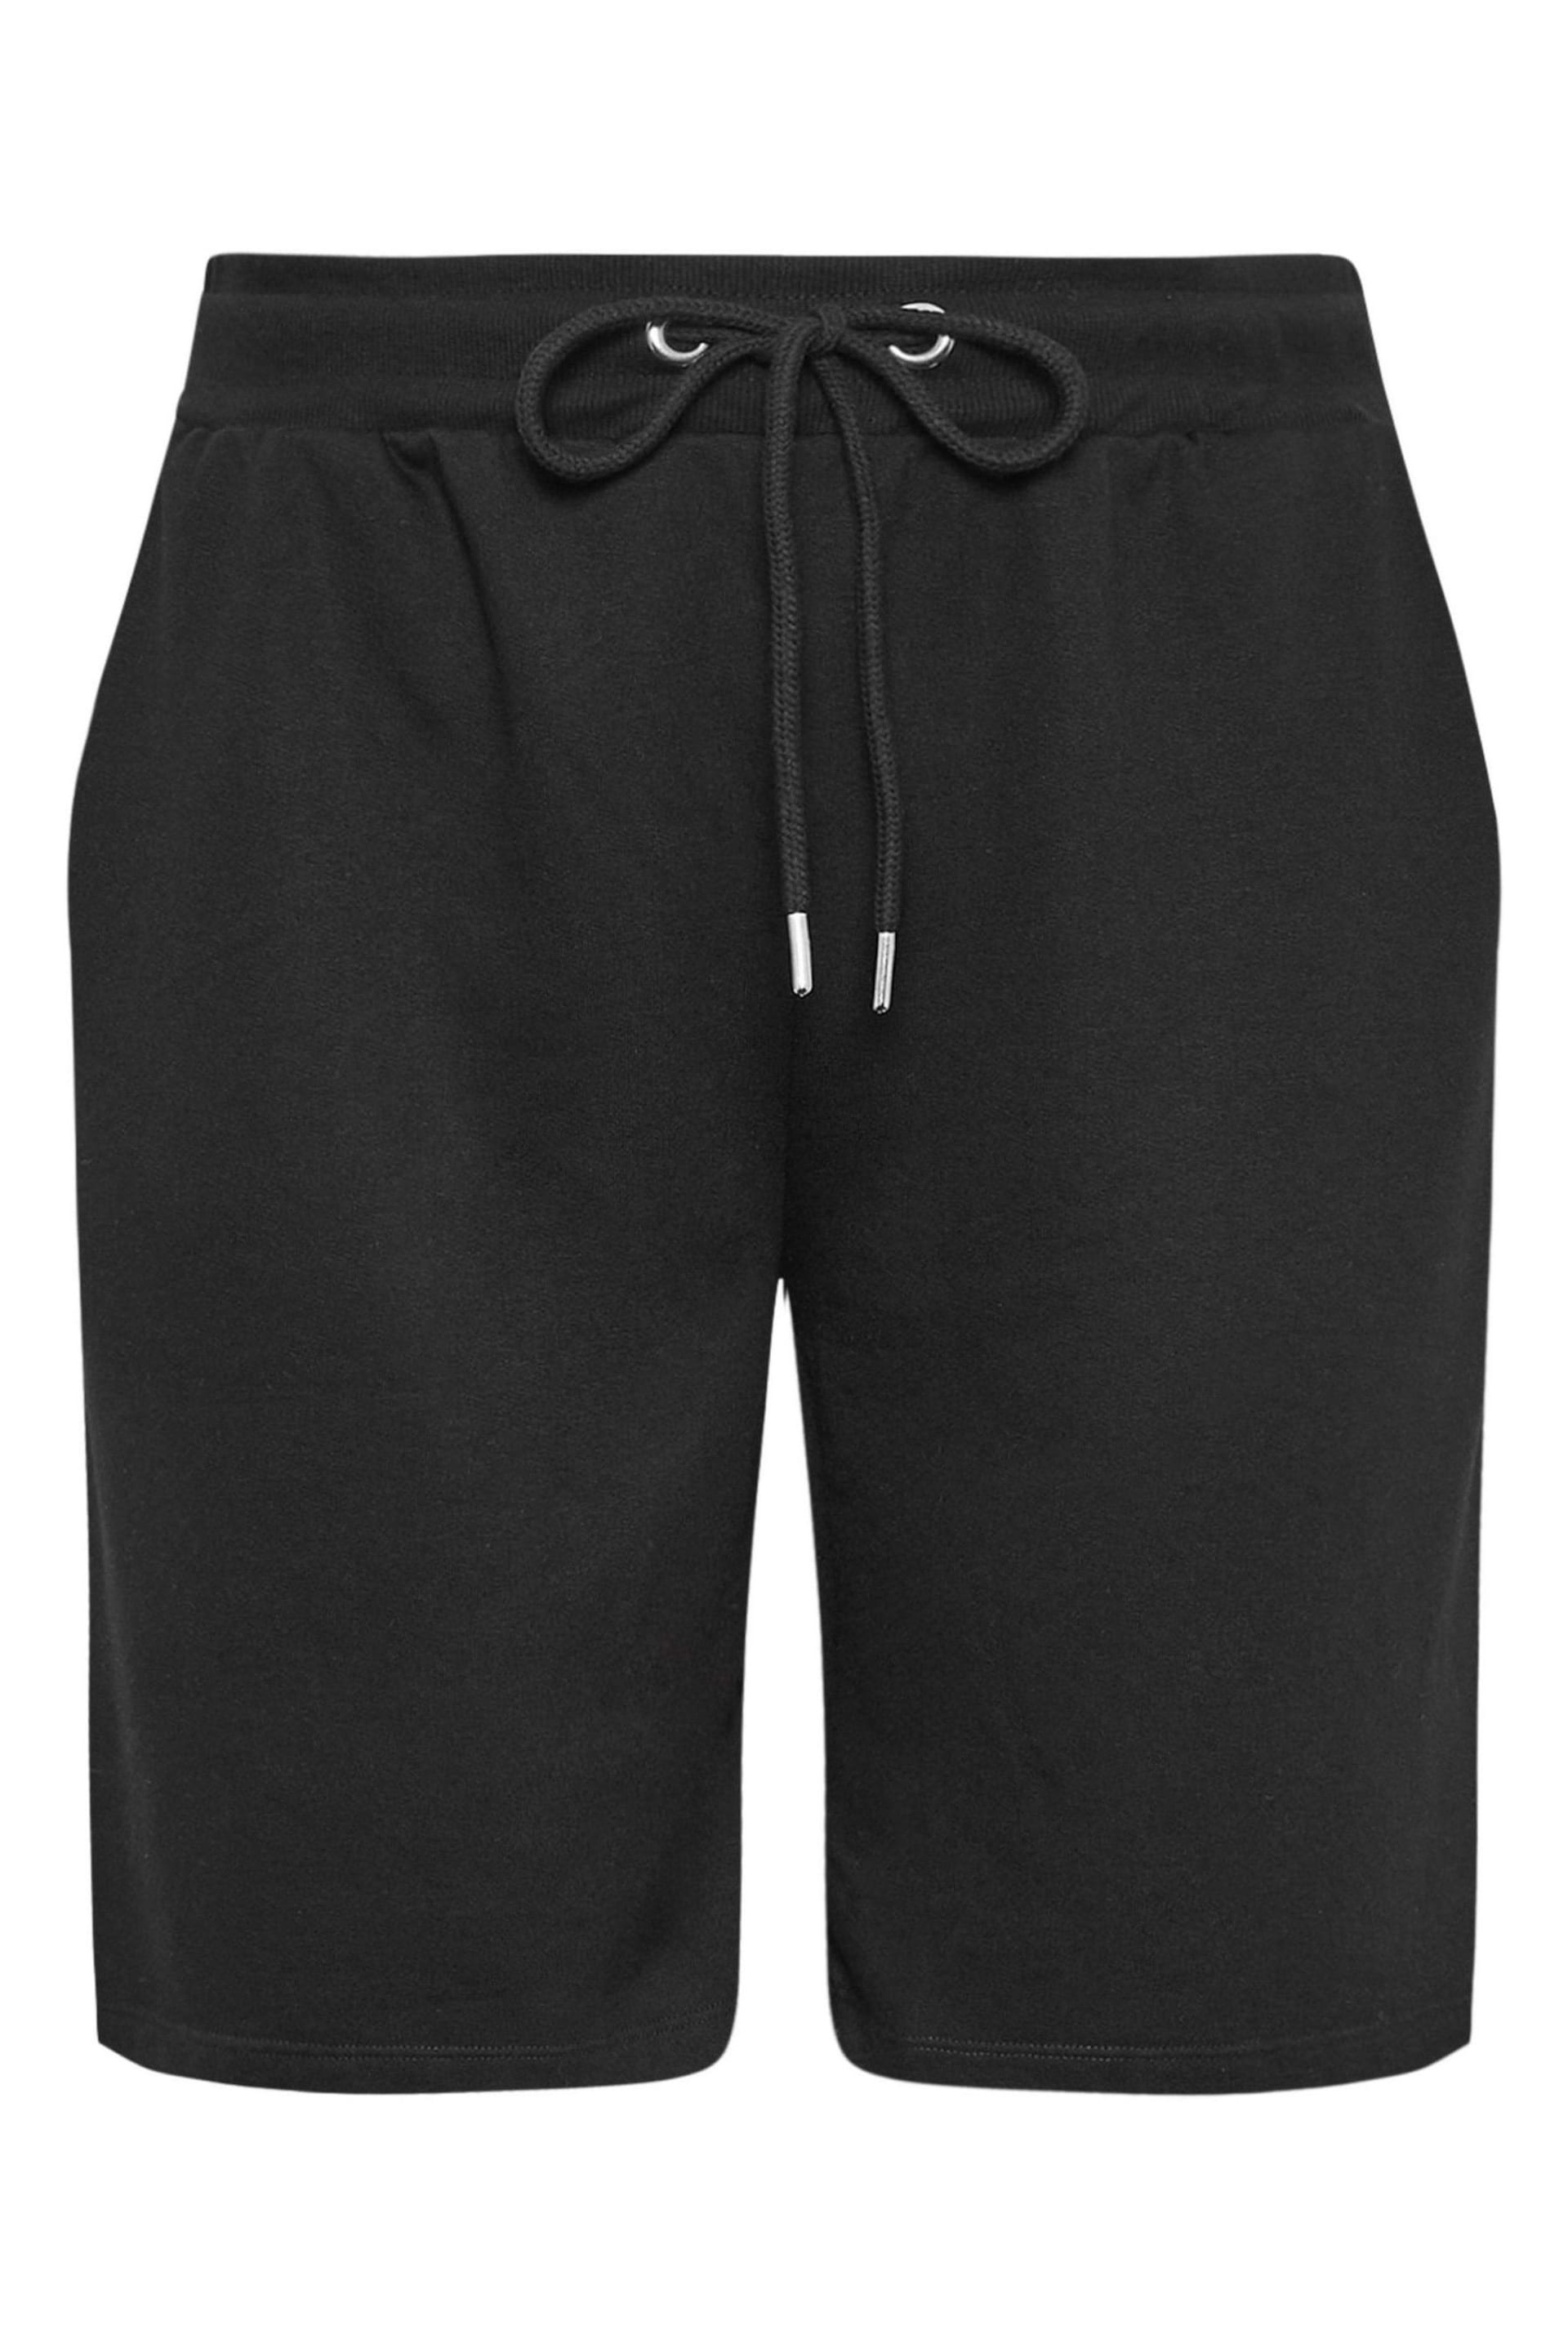 Yours Curve Black Jogger Shorts - Image 7 of 7